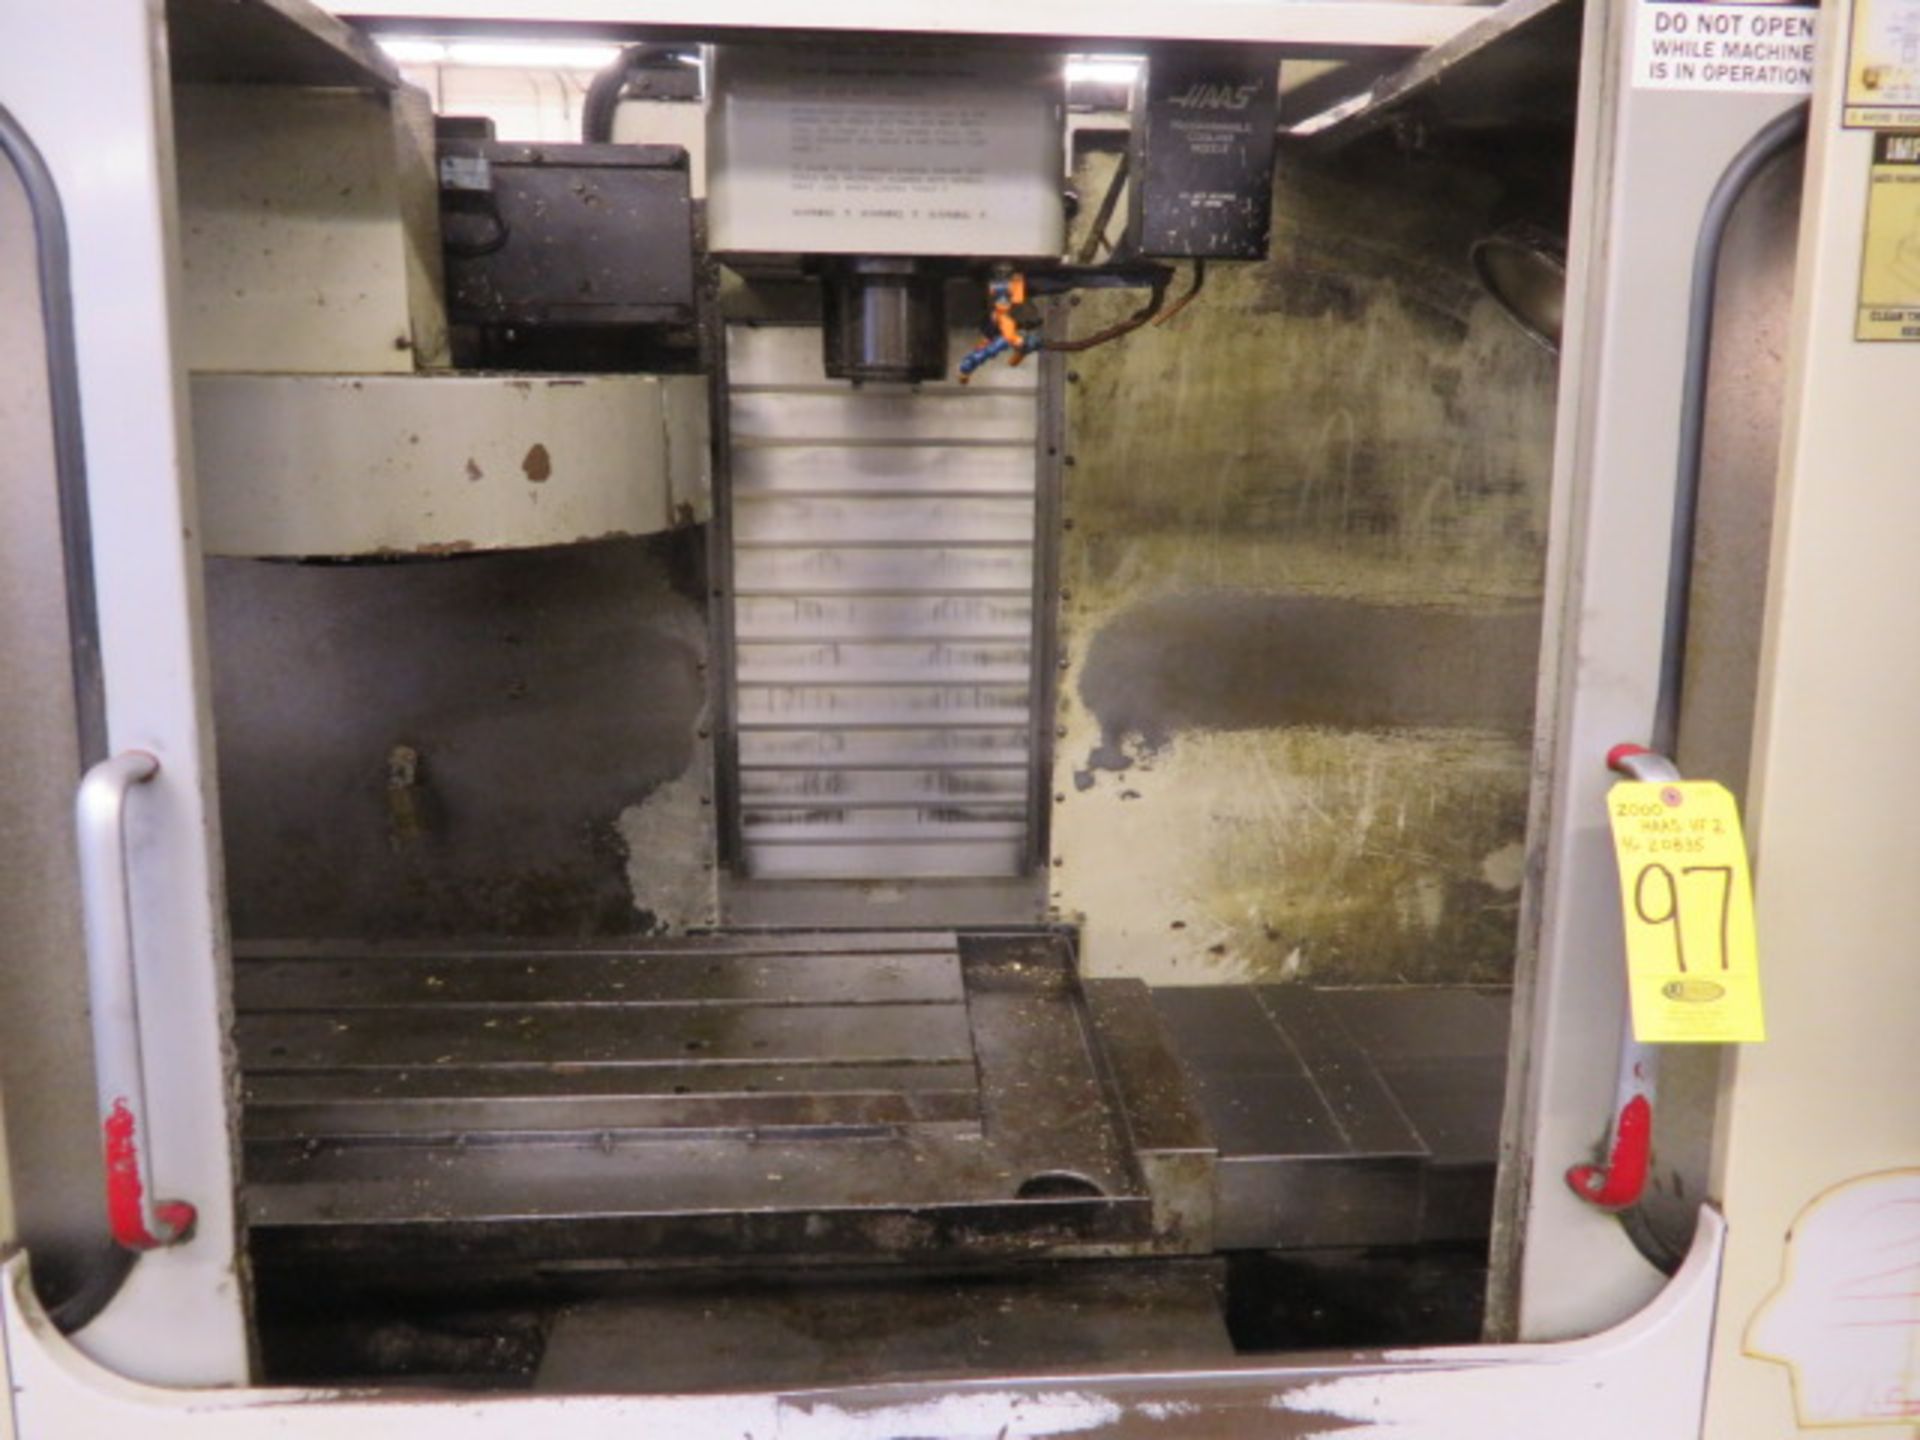 2000 HAAS VF-2 CNC Vertical Machining Center, S/N 20835, HAAS CNC Control, 4TH AXIS ENABLED - Image 3 of 6